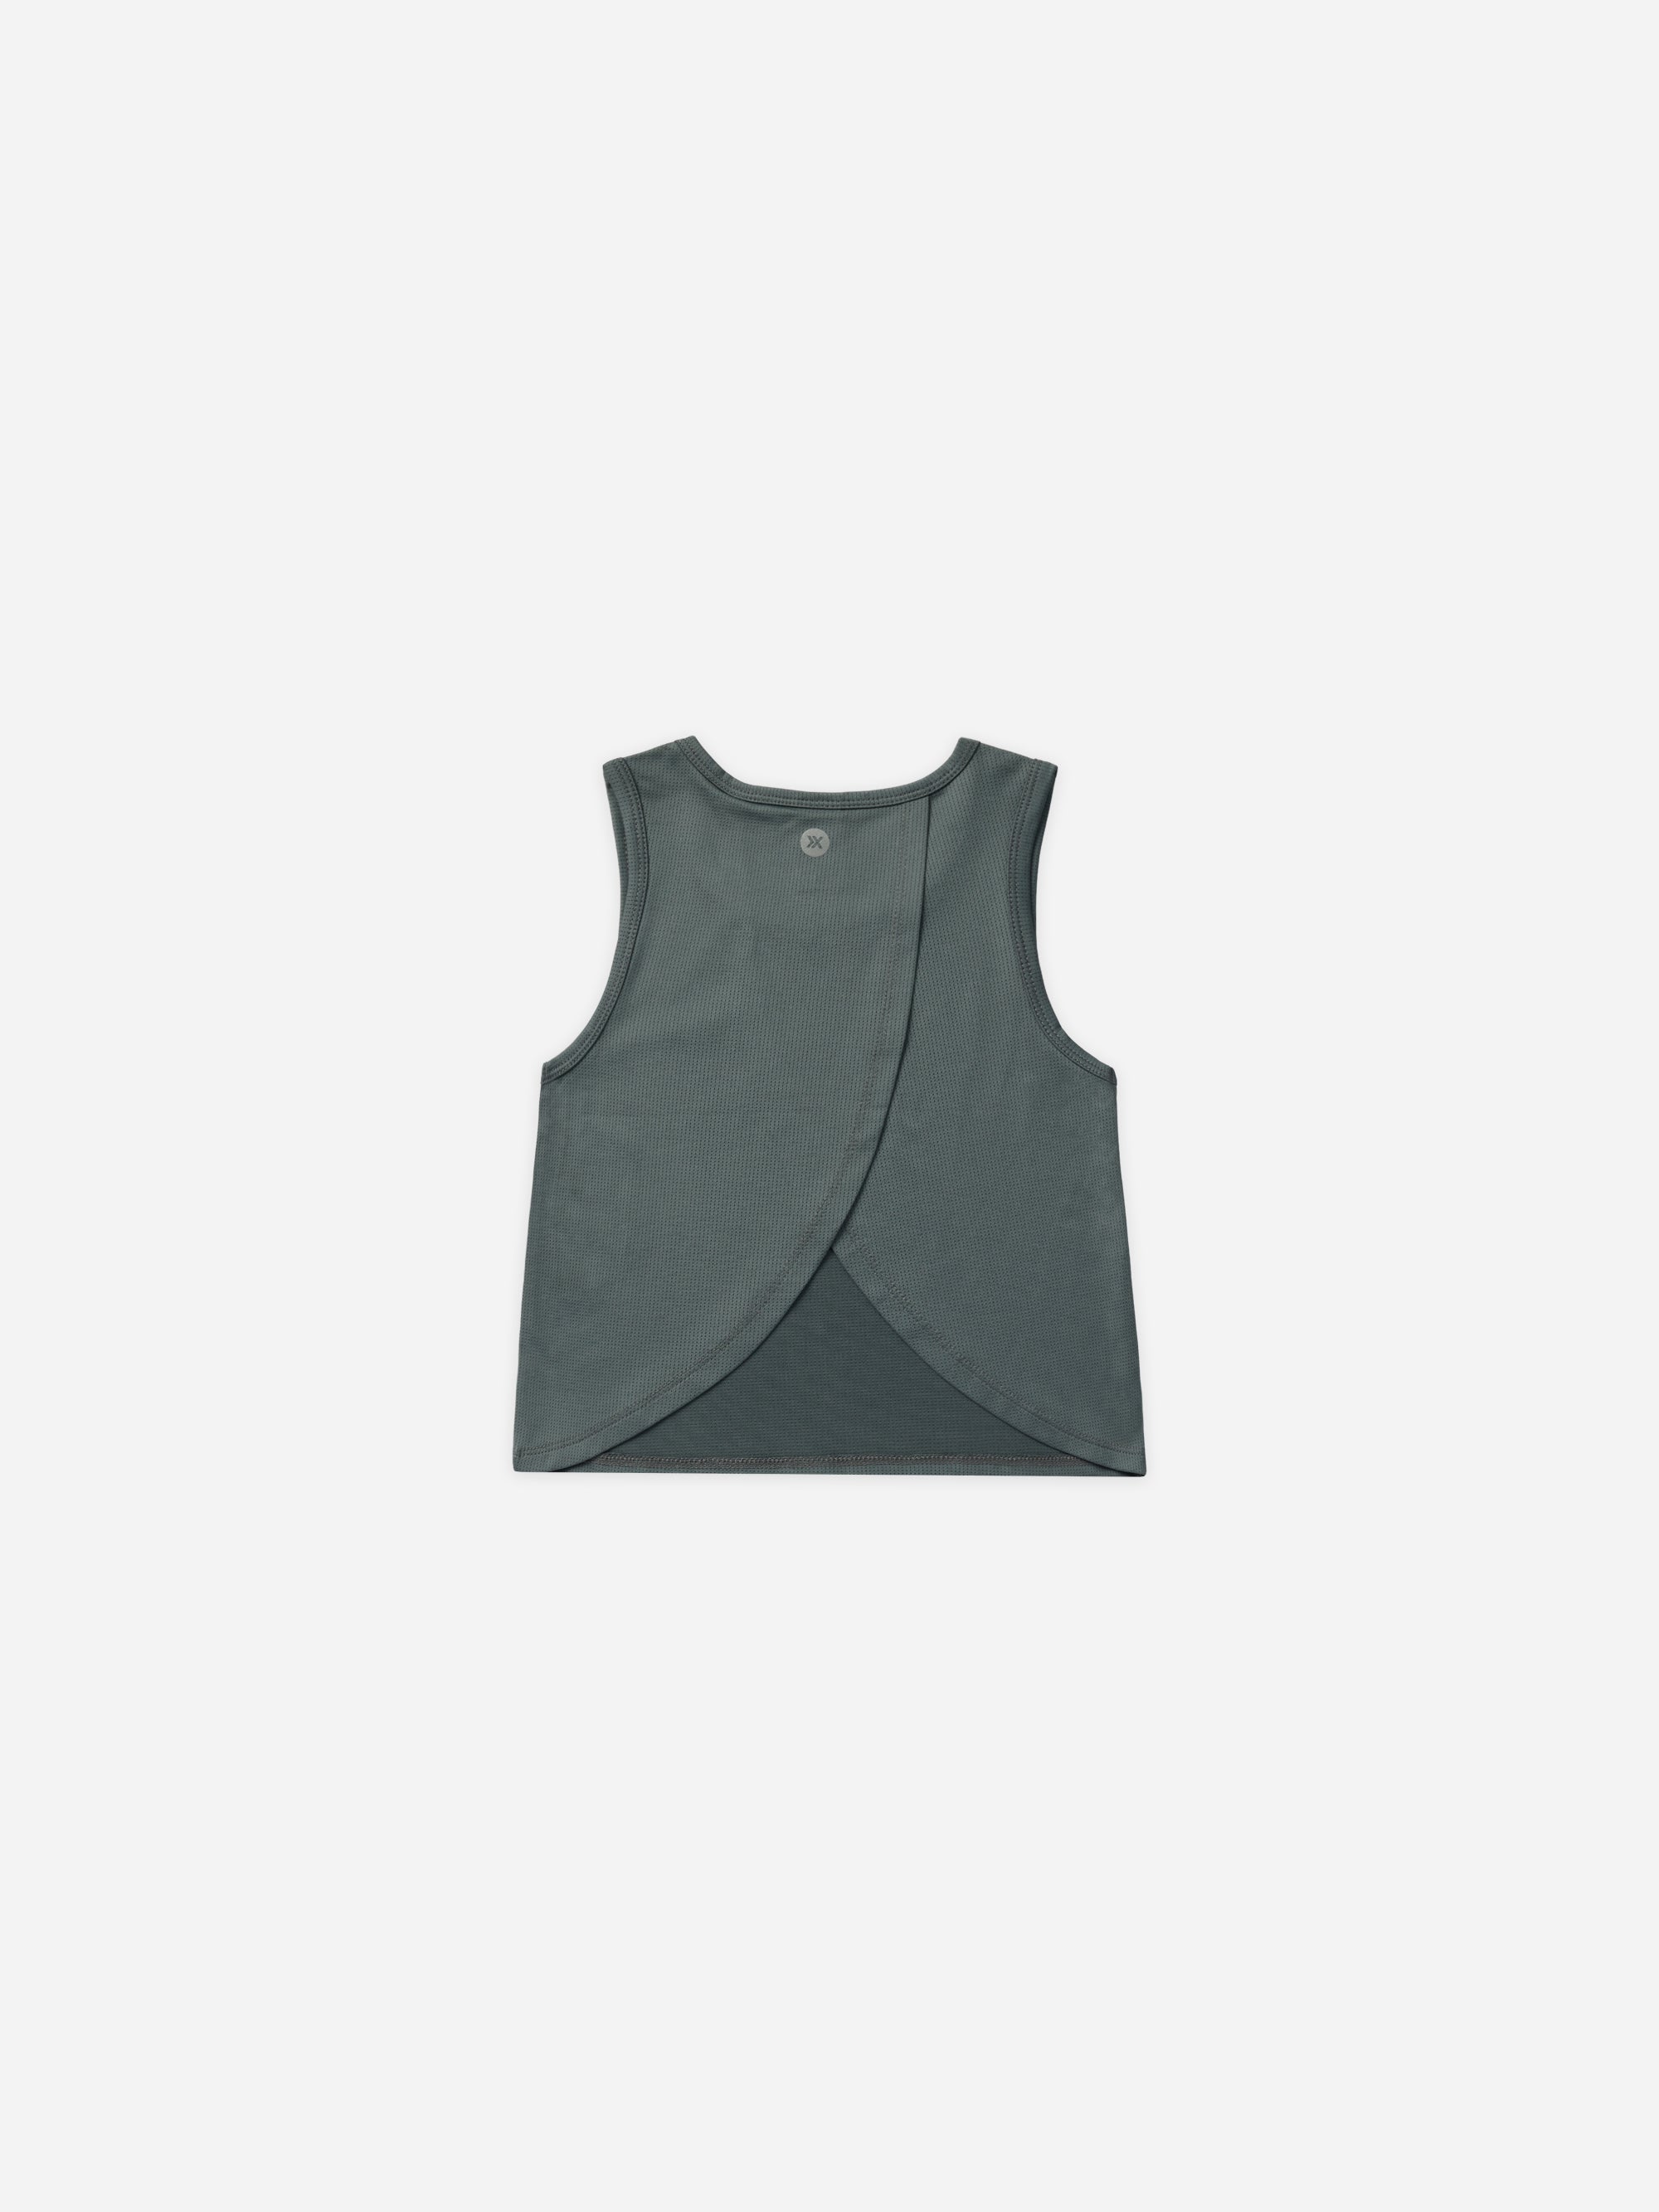 Tulip-Back Tech Tank || Indigo - Rylee + Cru | Kids Clothes | Trendy Baby Clothes | Modern Infant Outfits |